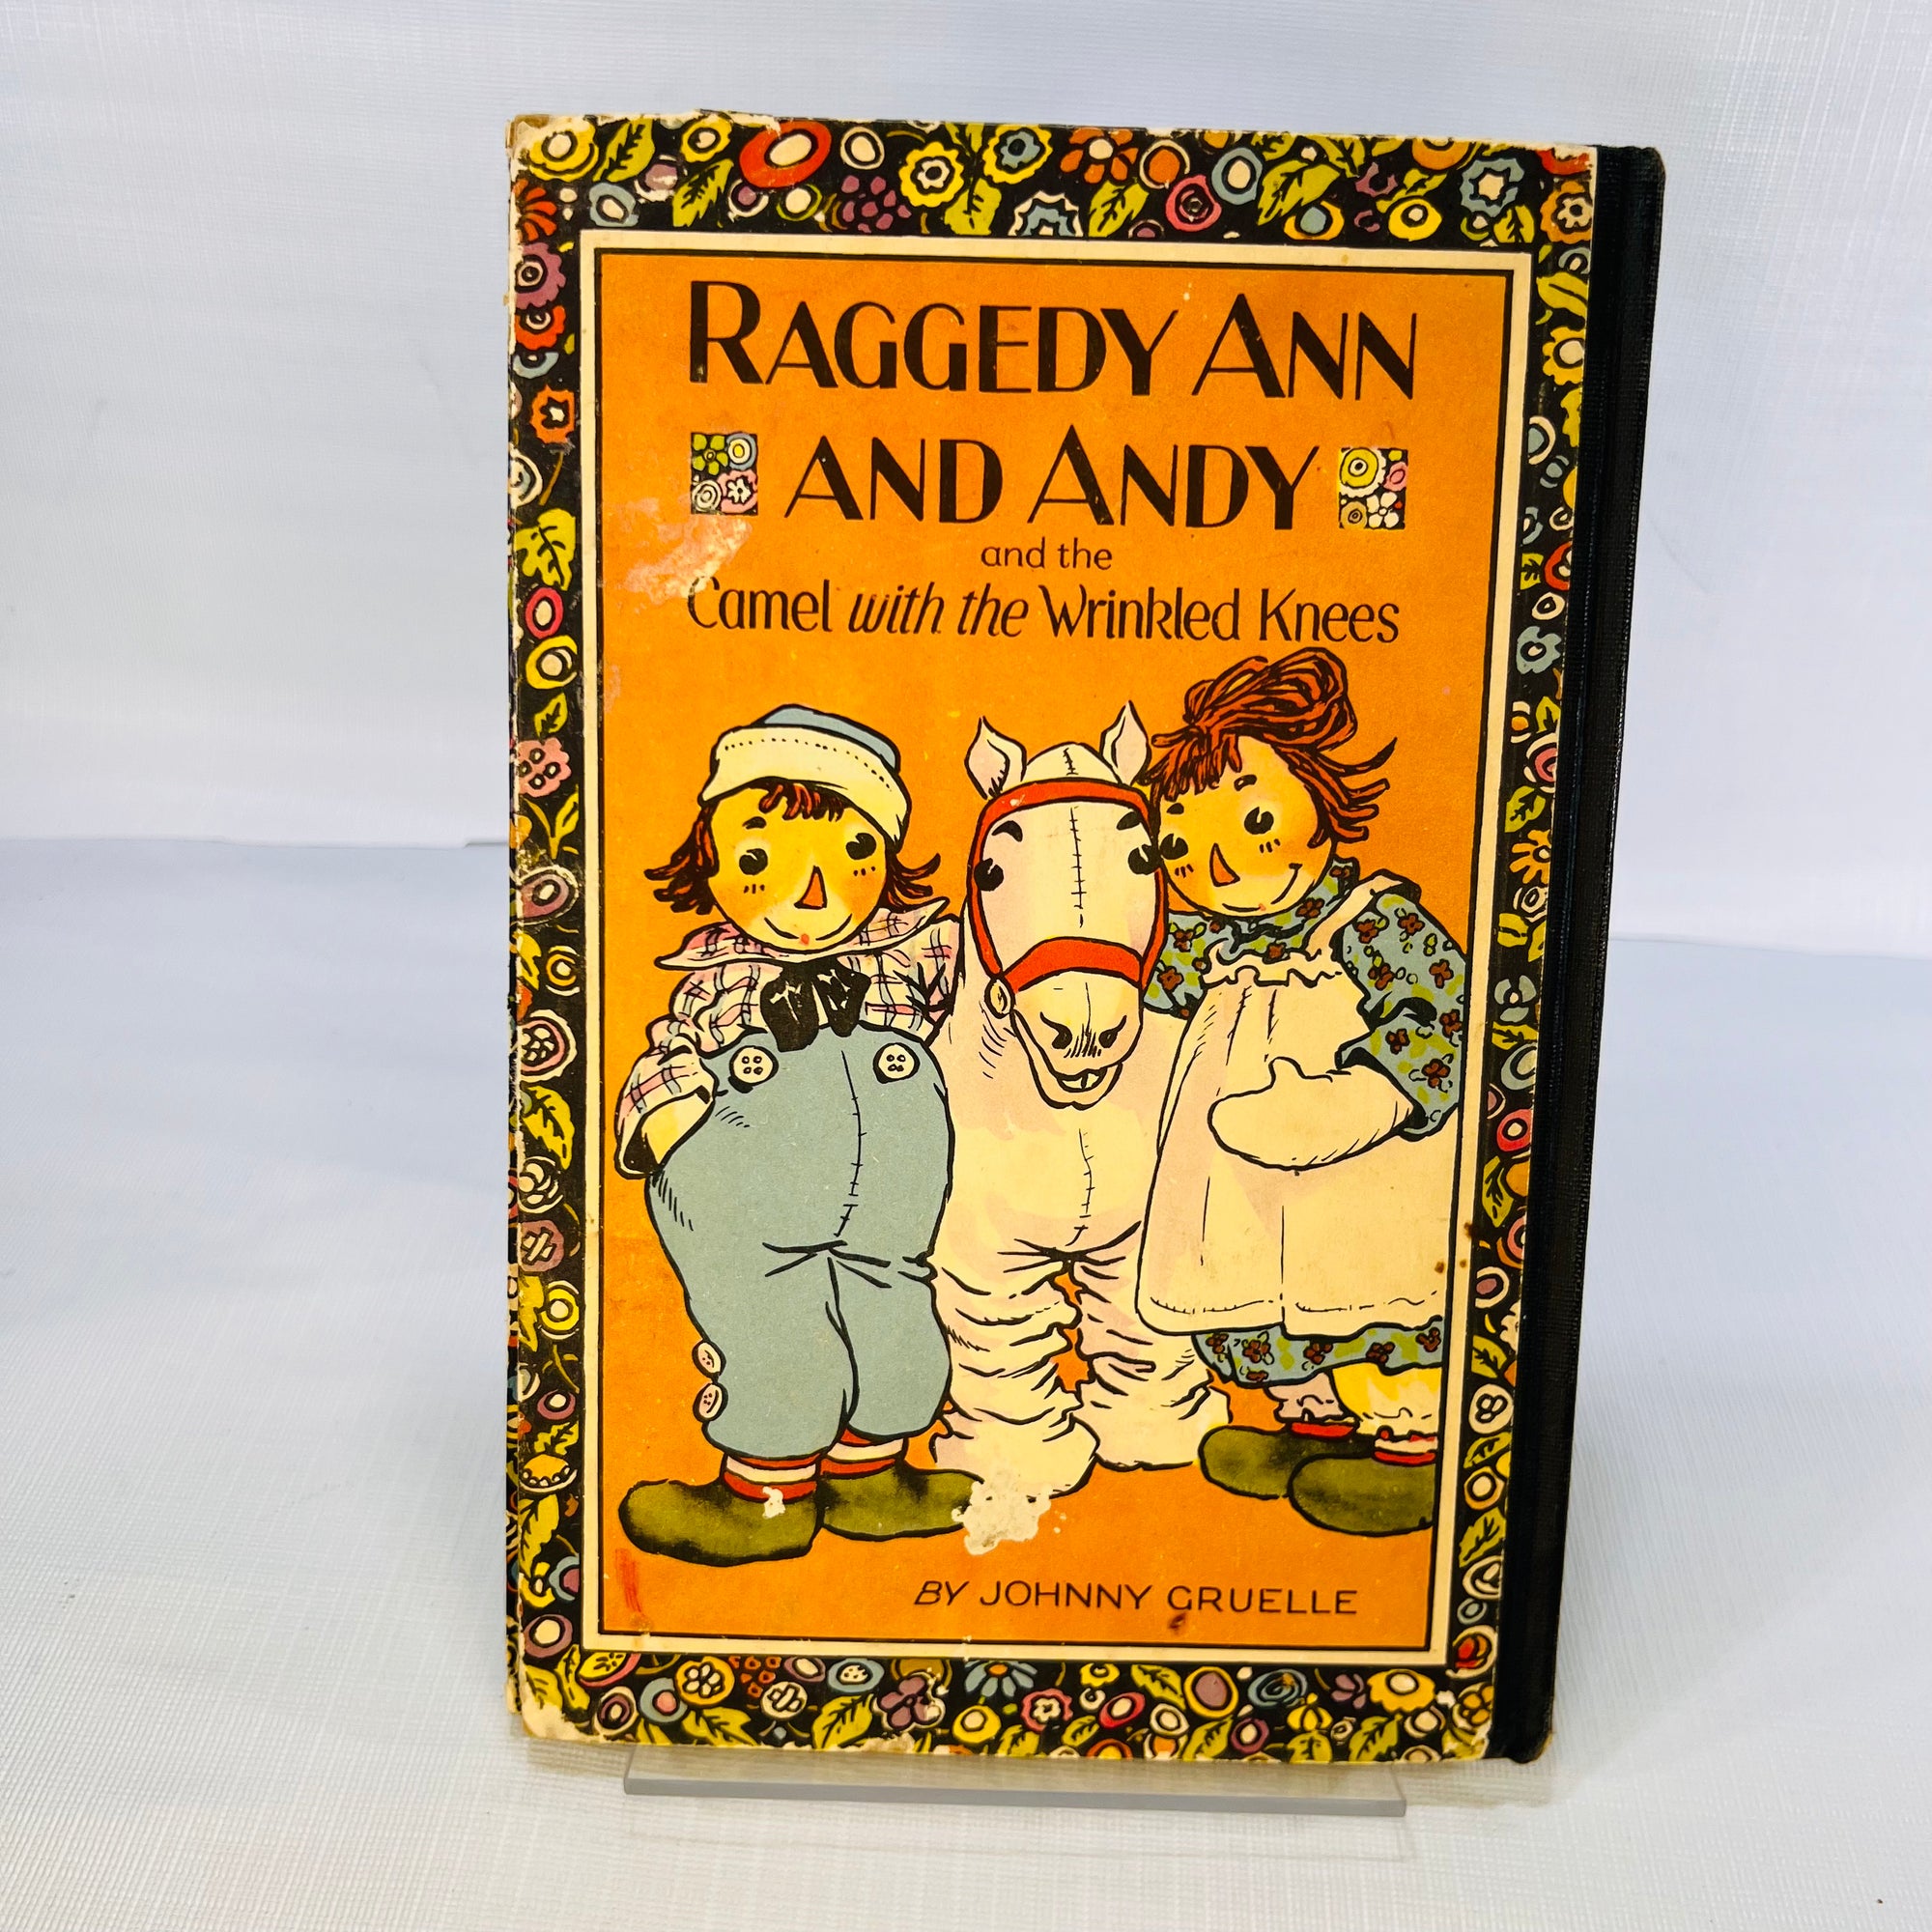 Raggedy Ann and Andy and the Camel with the Wrinkled Knees written and  illustrated by Johnny Gruelle 1924  M. A. Donohue & Company